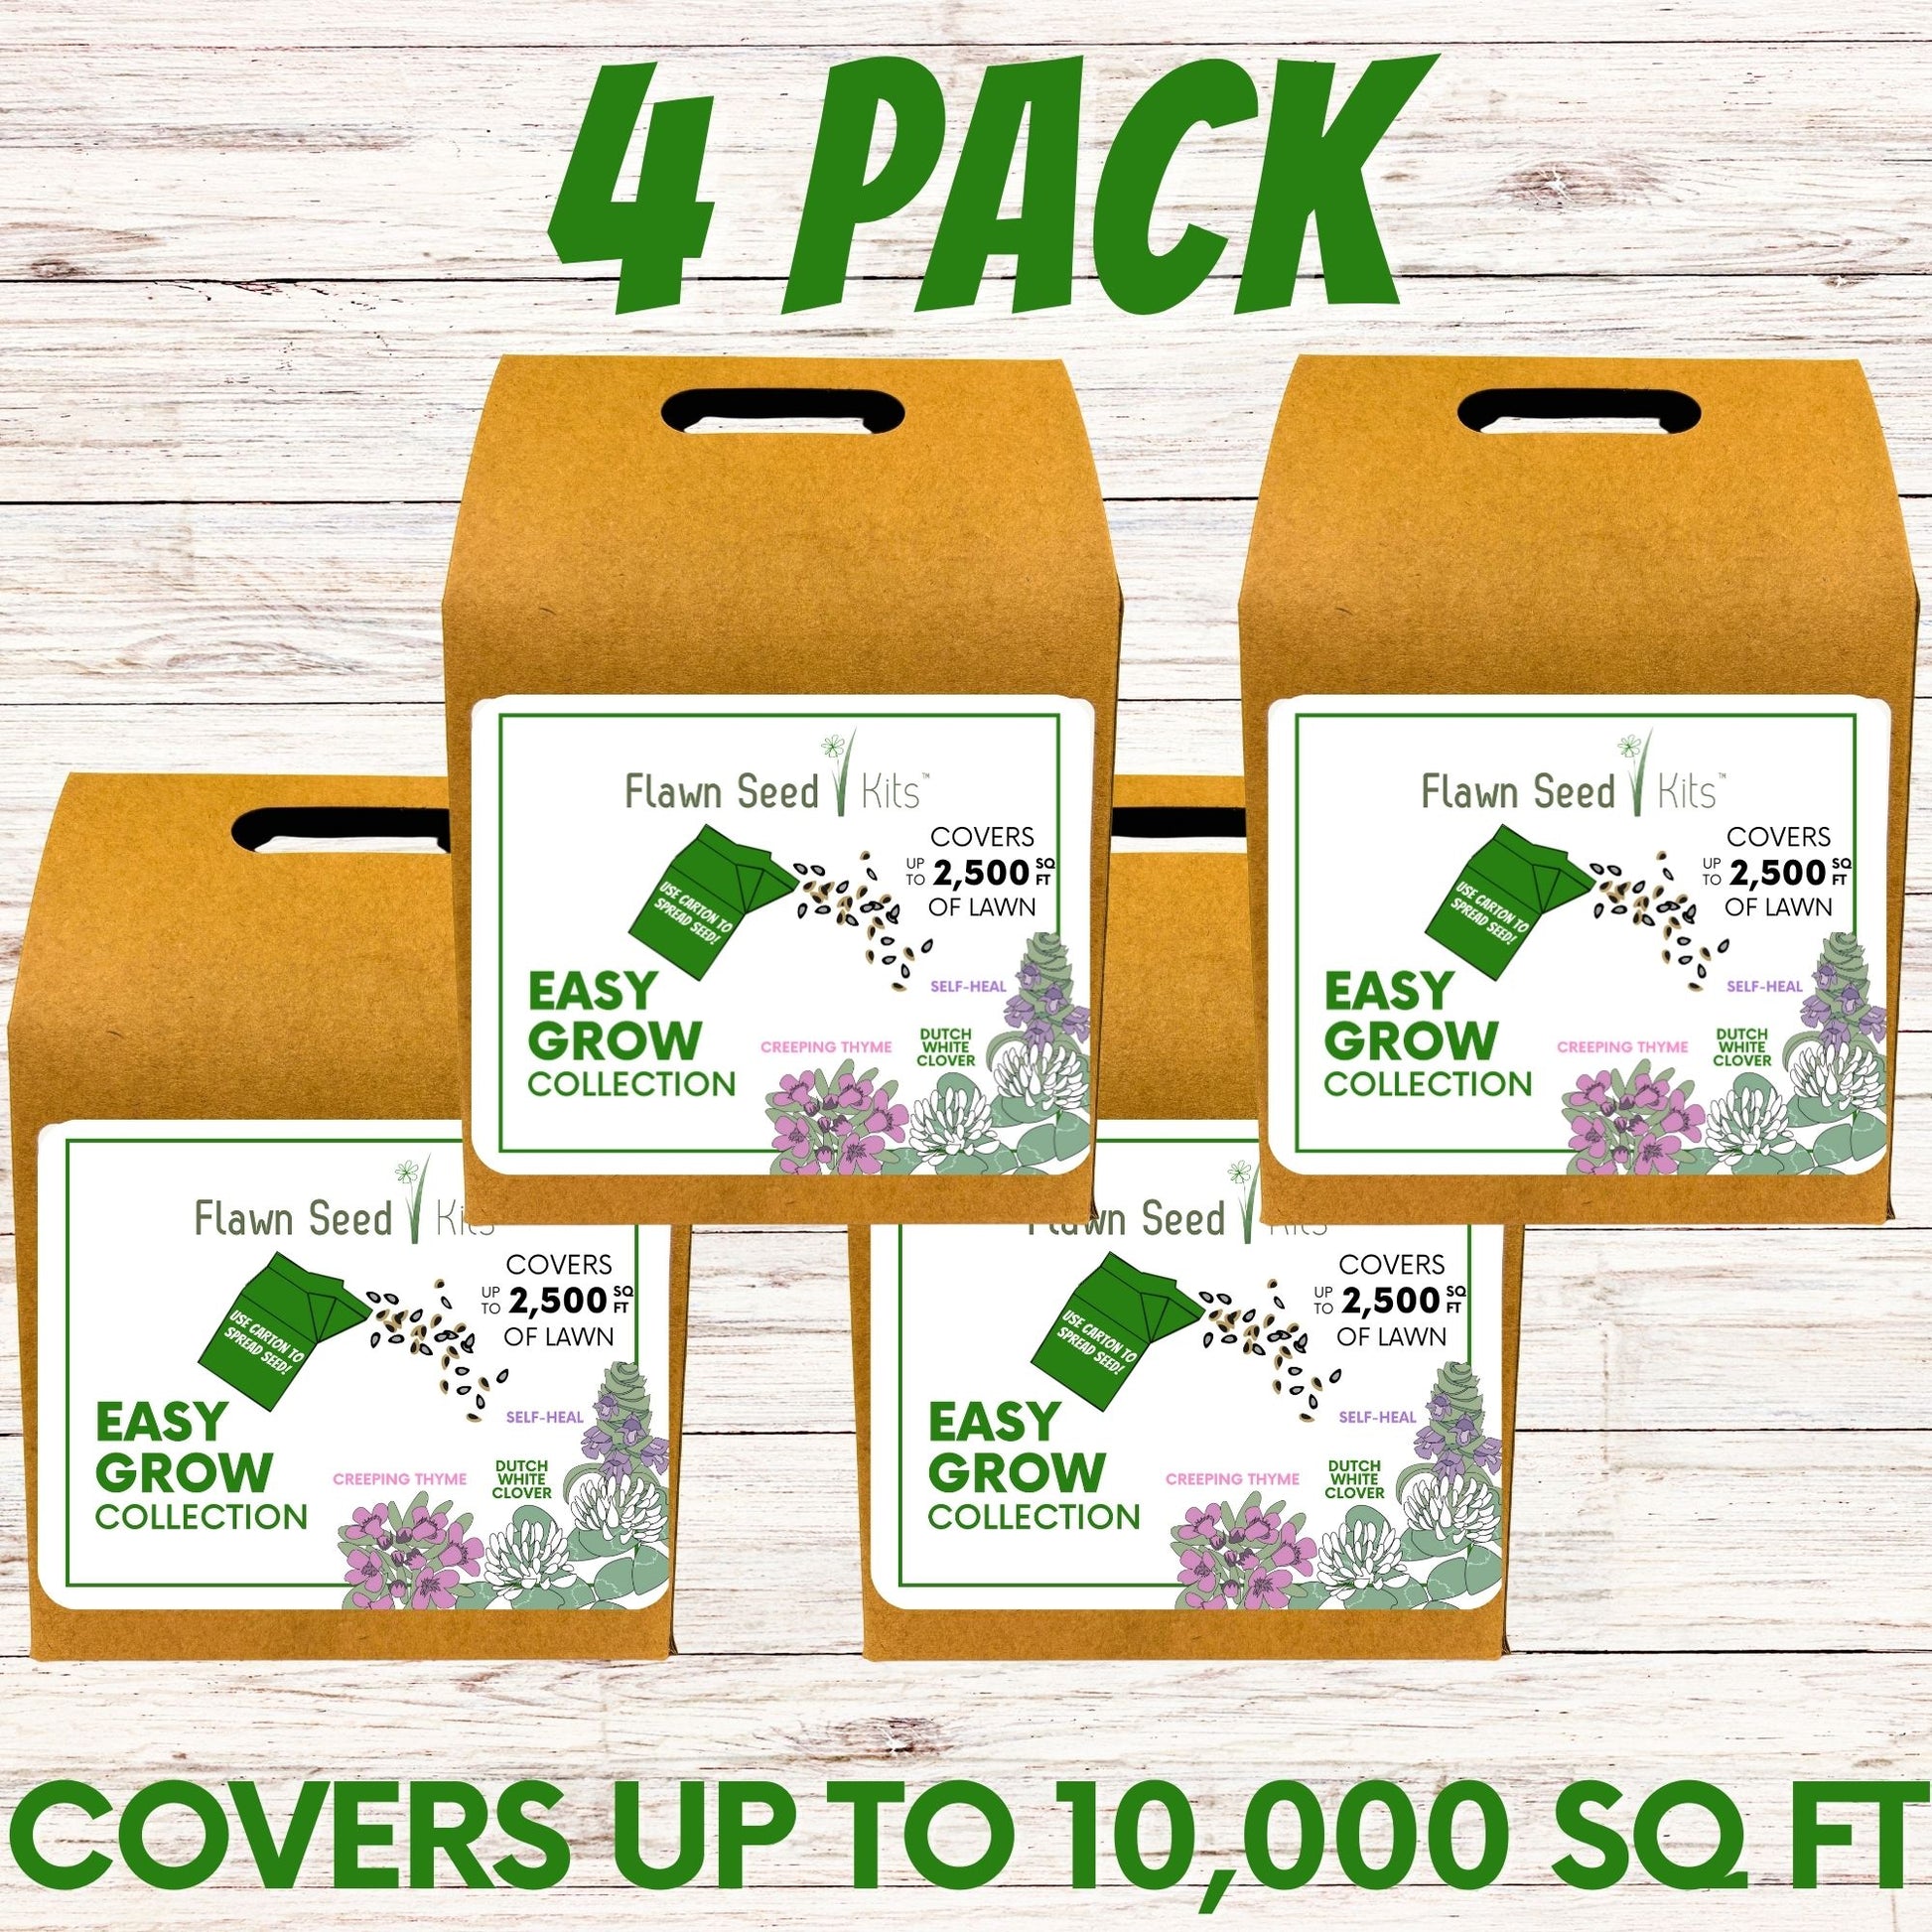 Bee Lawn Flowering Pollinator Seed Kit, Dutch White Clover, Self-Heal, Creeping Thyme, Easy Spread Container 4 Pack Covers 10,000 square feet